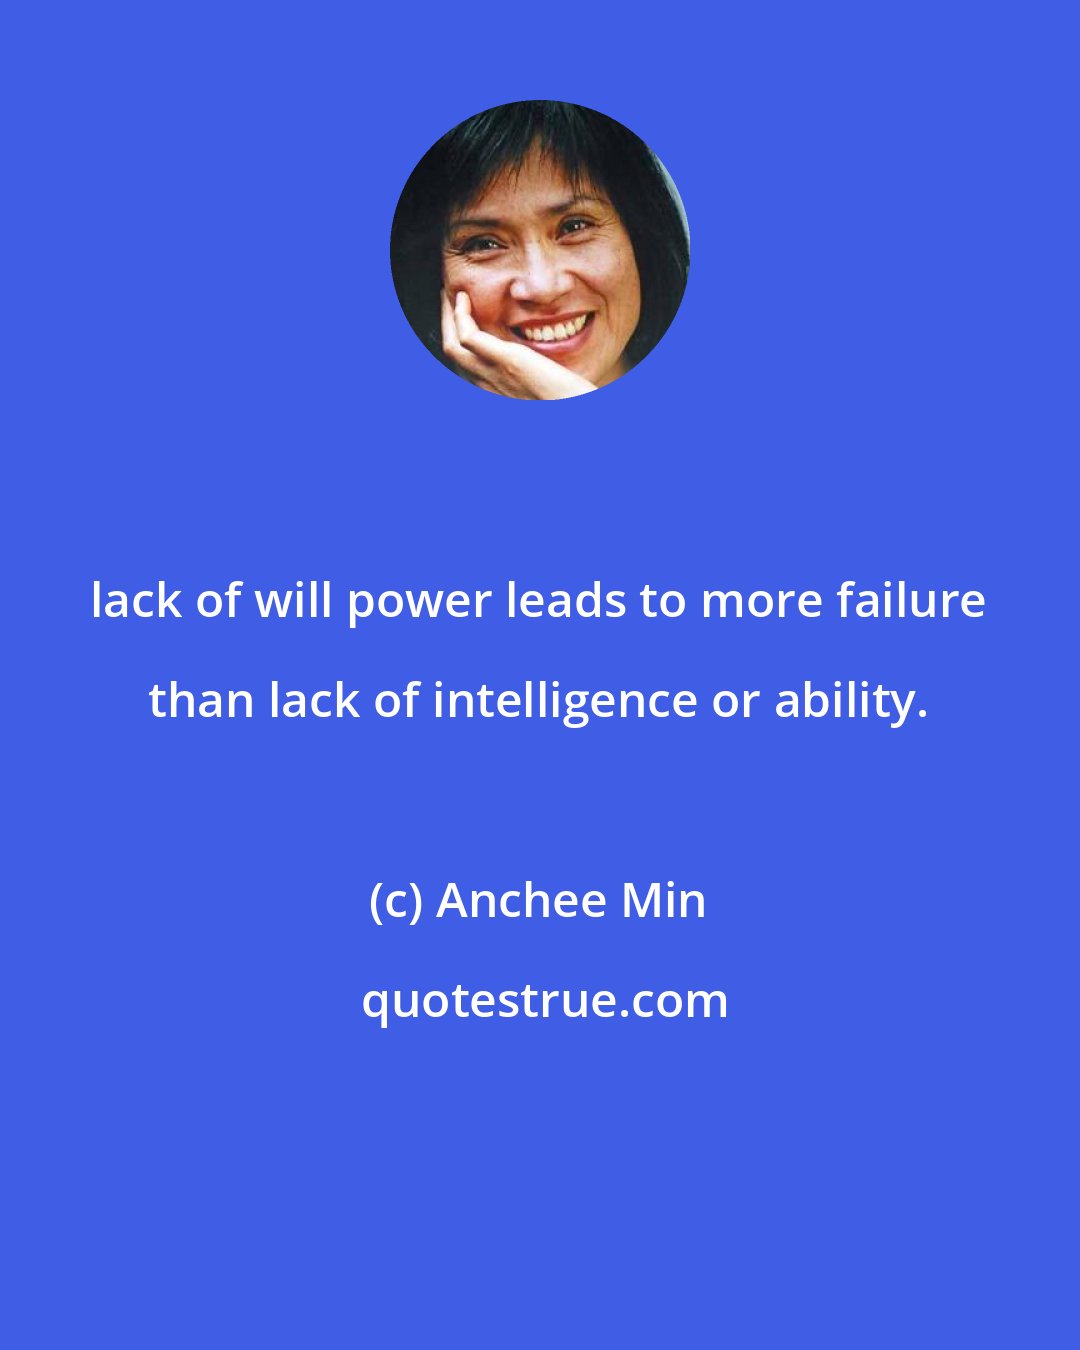 Anchee Min: lack of will power leads to more failure than lack of intelligence or ability.